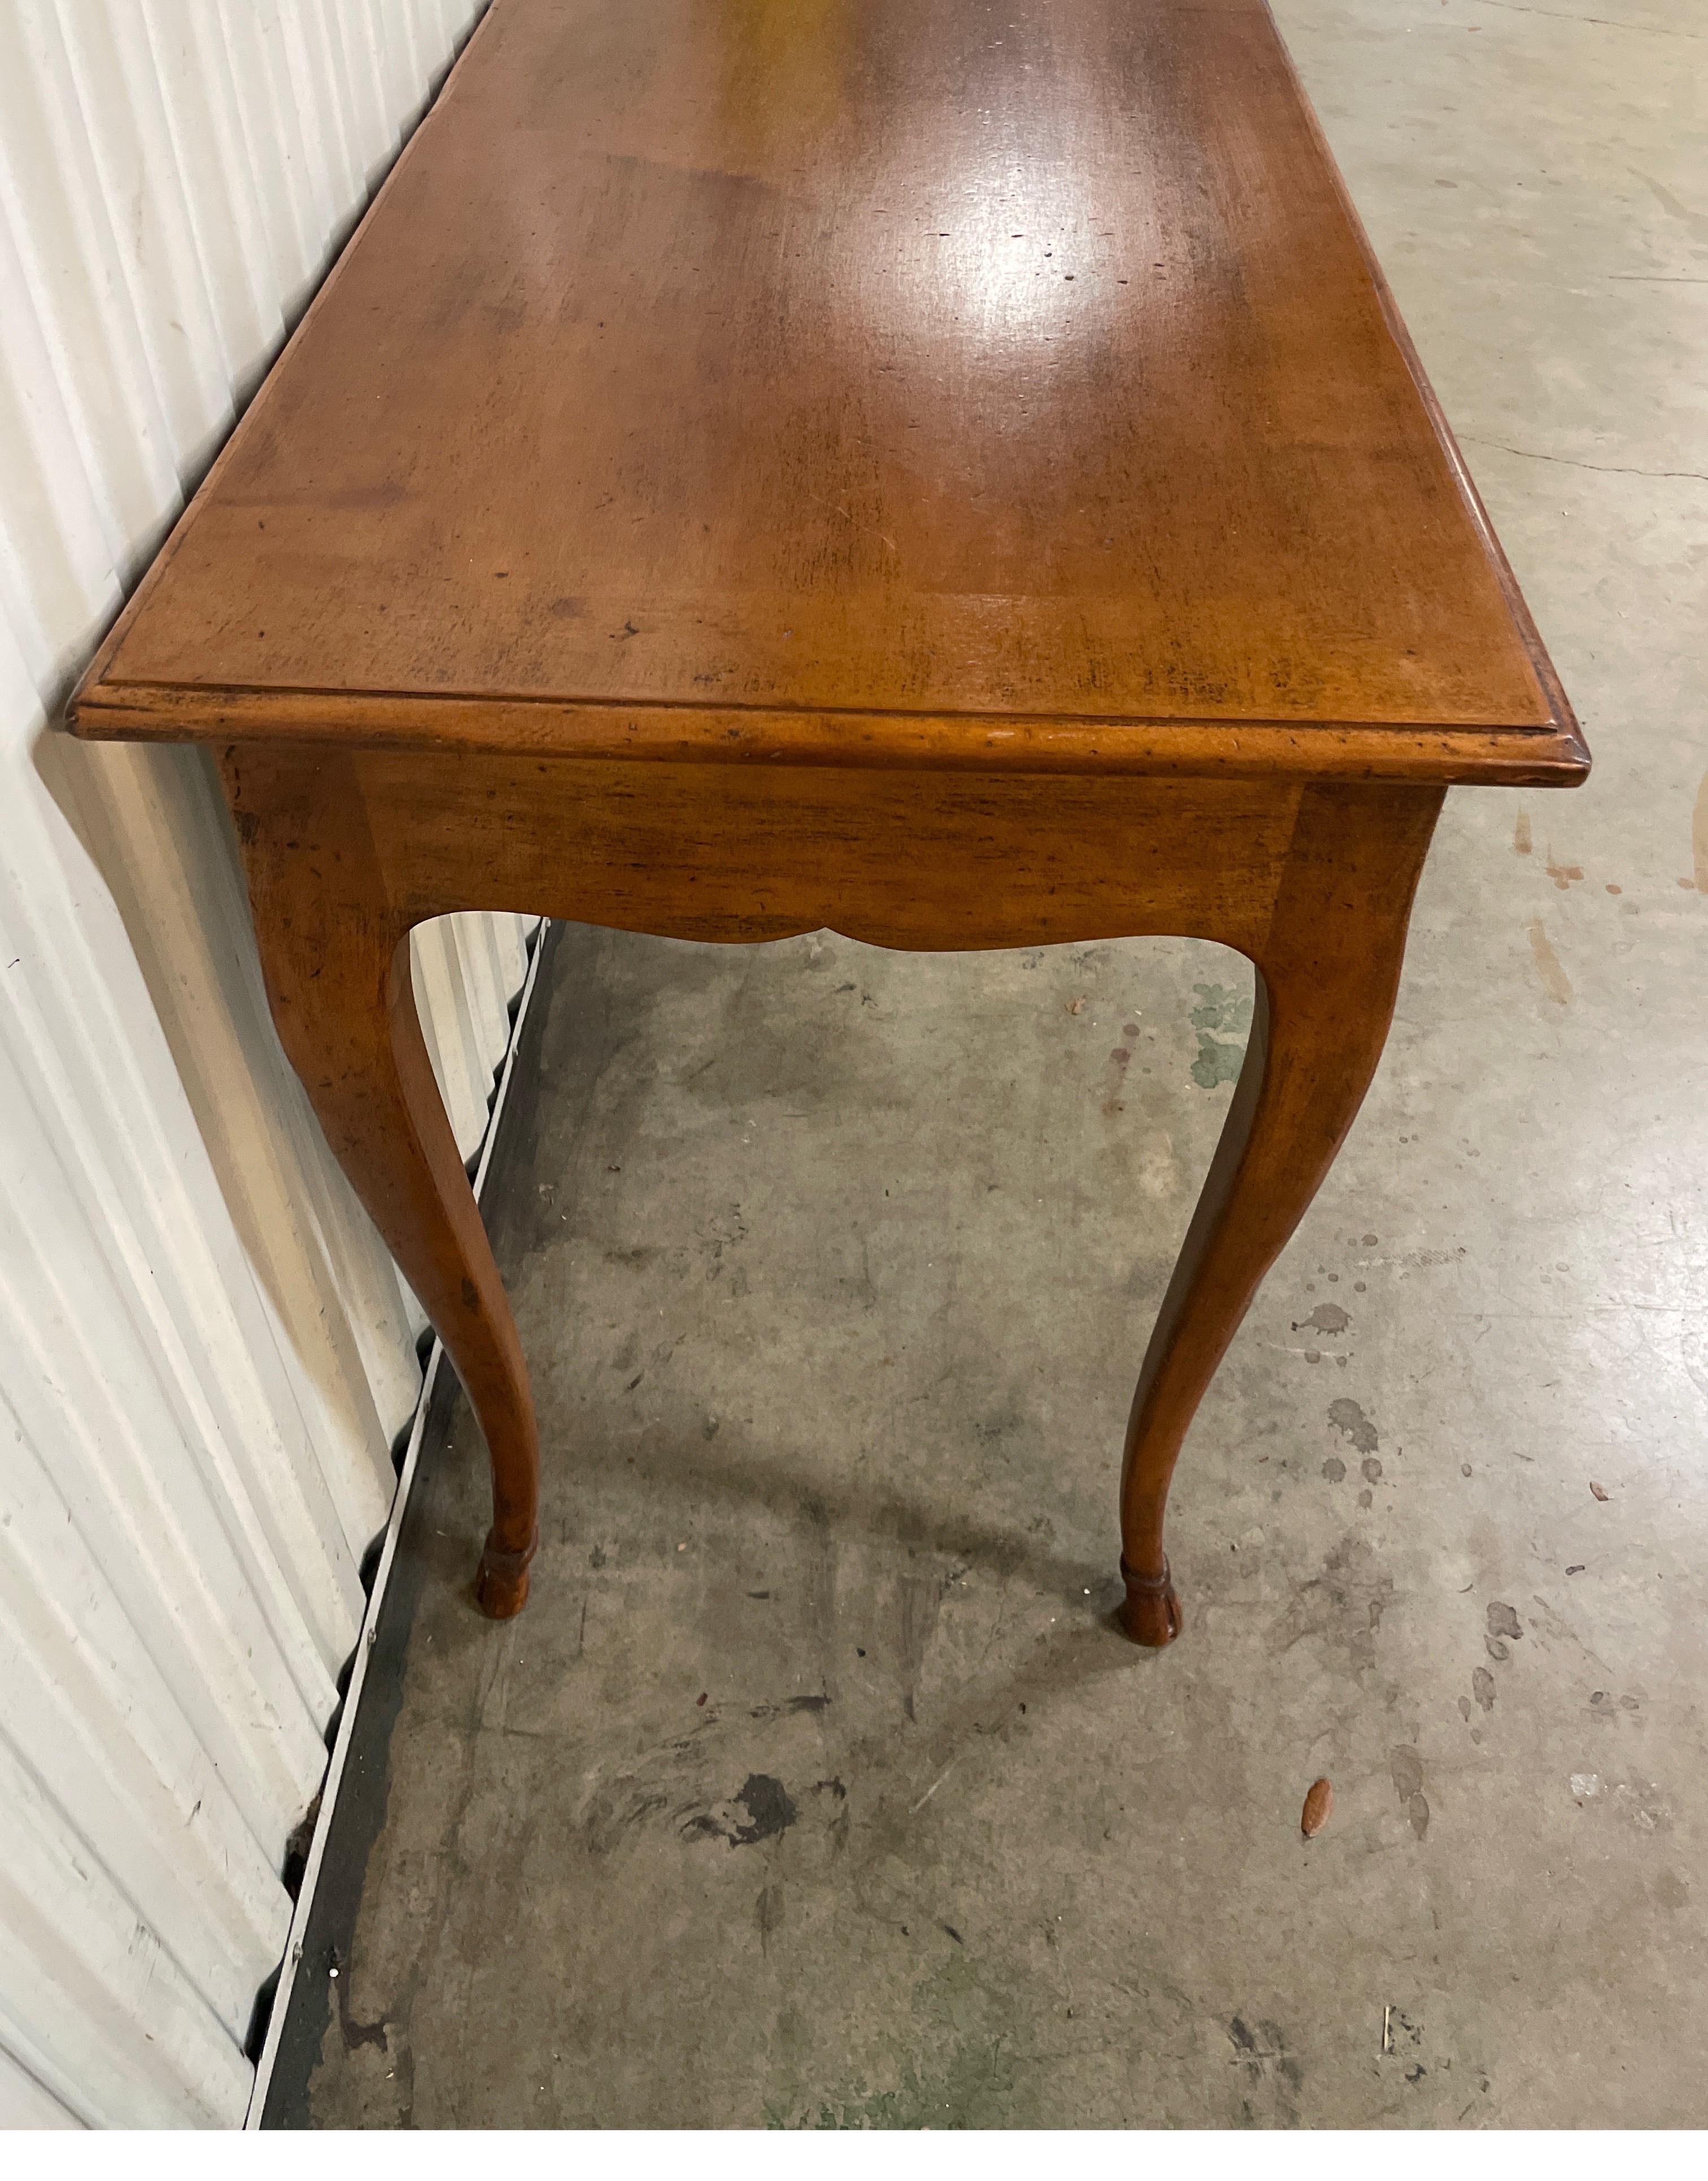 Italian Country French Style Desk with Hoof Feet